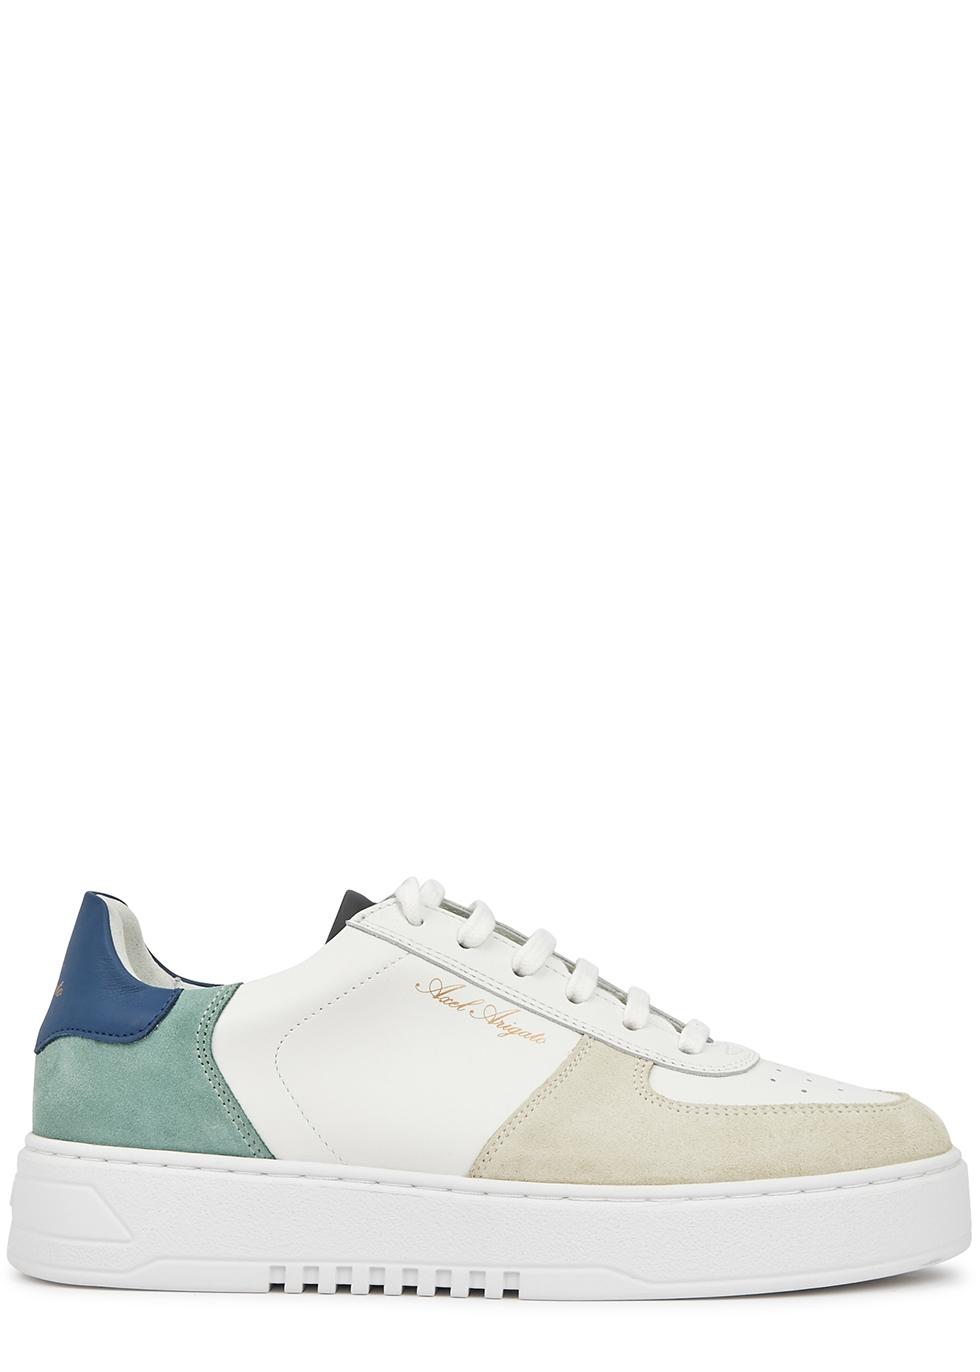 Axel Arigato Orbit Panelled Leather Sneakers in White for Men | Lyst